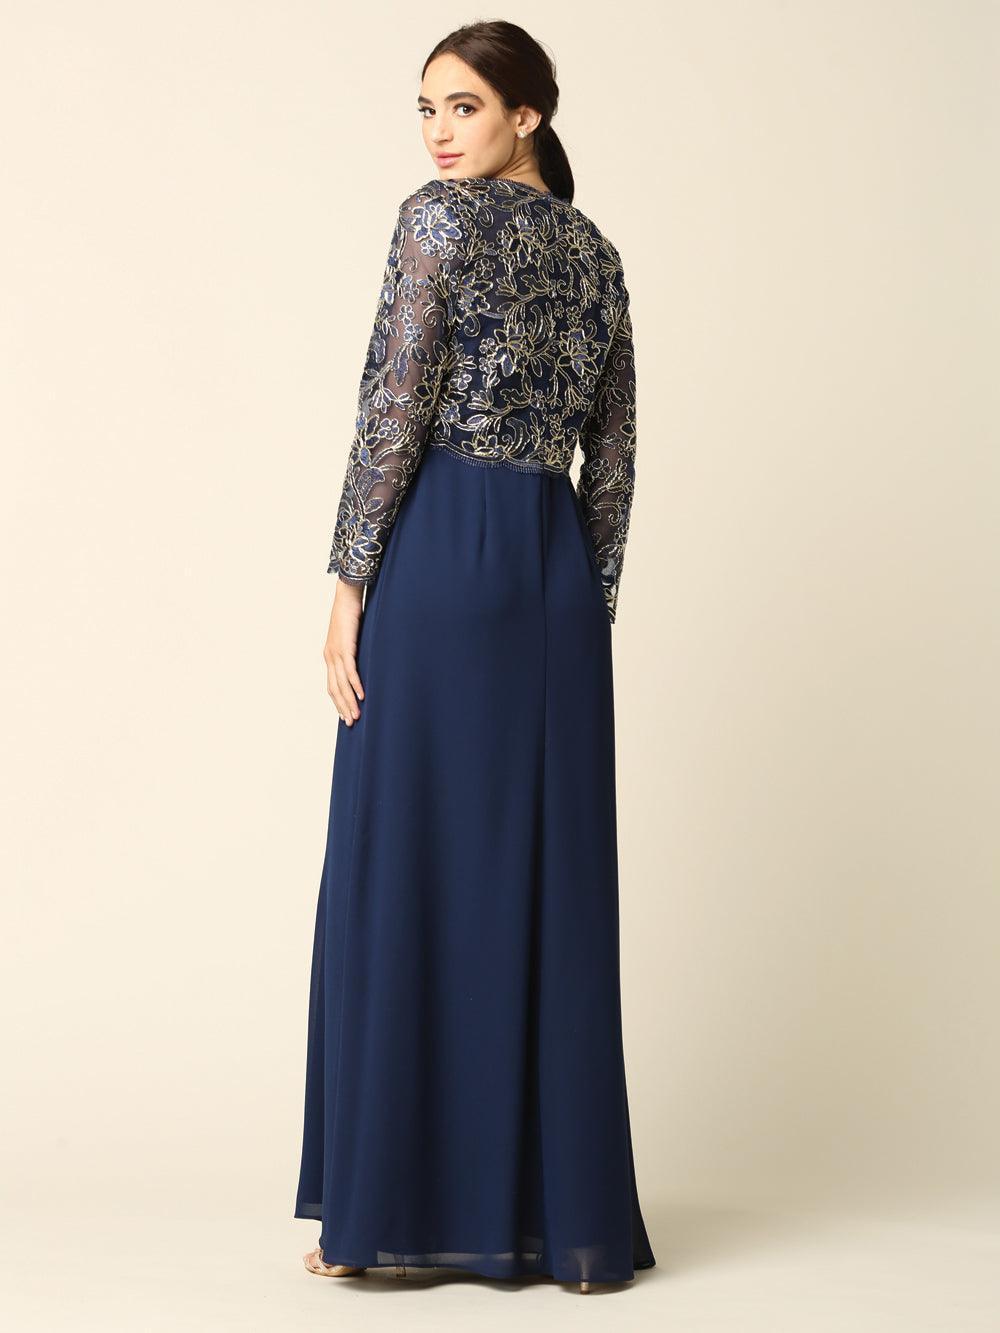 Long Formal Mother of the Bride Lace Jacket Dress - The Dress Outlet